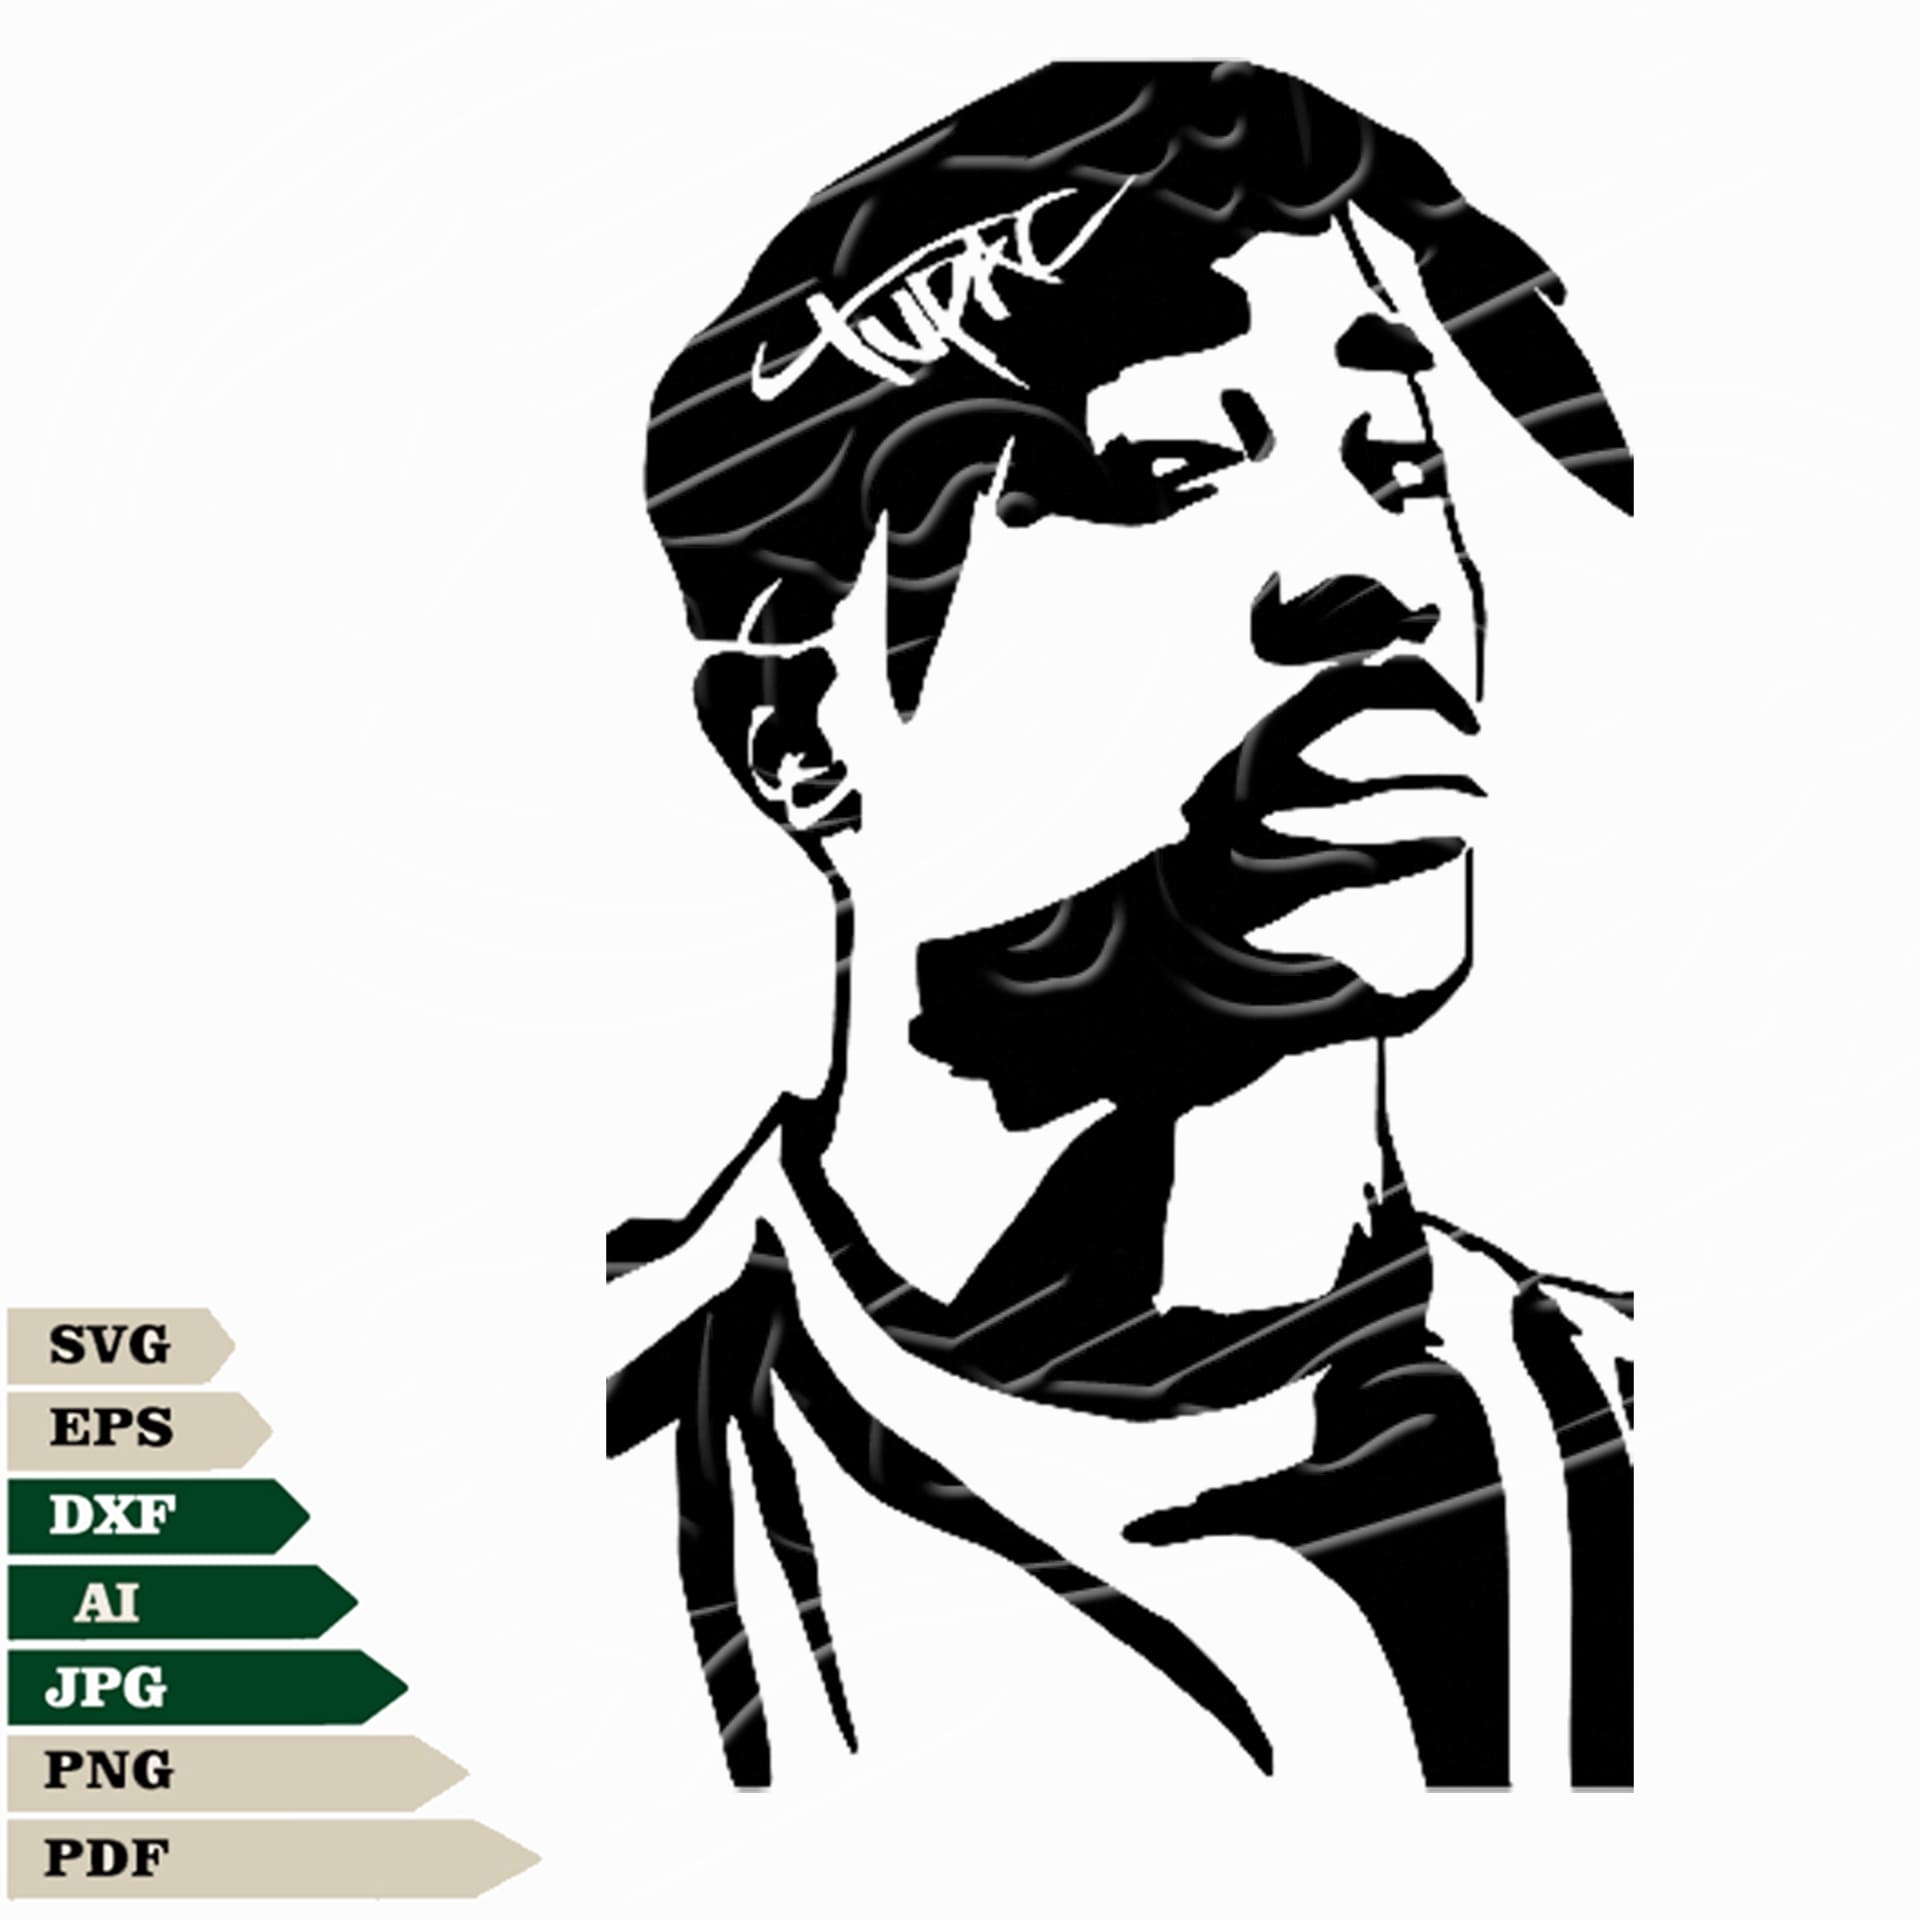 This product offers a variety of Tupac Shakur SVG files, PNGs, and vector graphics, ideal for creating tattoos, Cricut projects, and other artworks inspired by the hip hop king. Get hours of creative fun with these high-quality files.